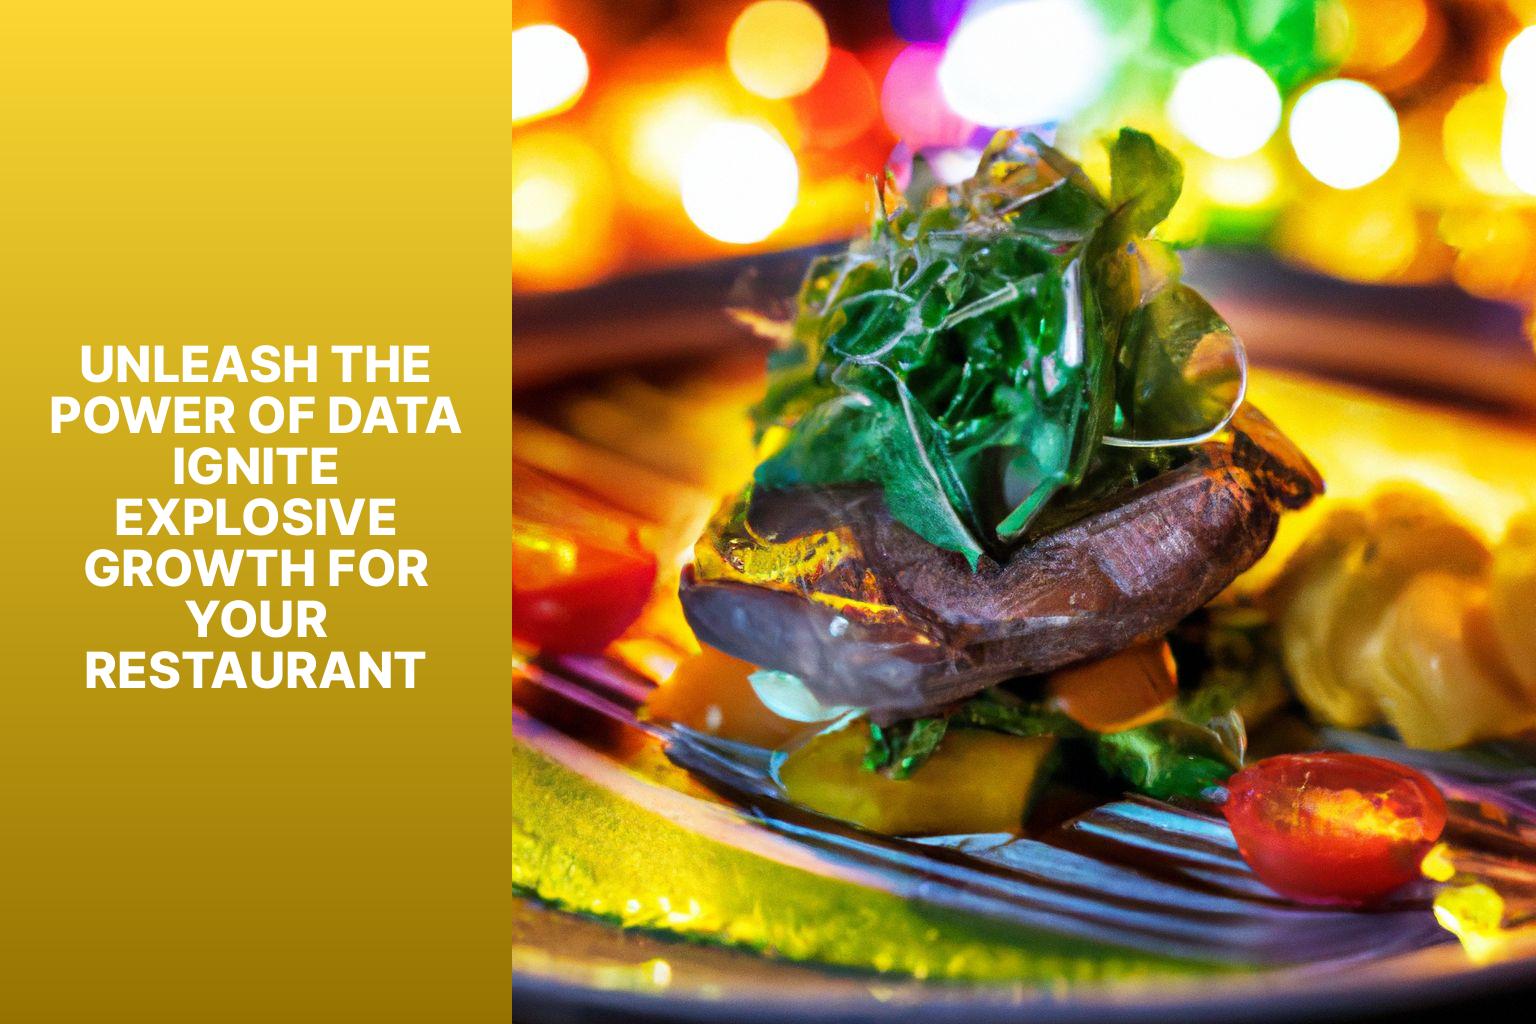 Unleash the Power of Data Ignite Explosive Growth for Your Restaurant